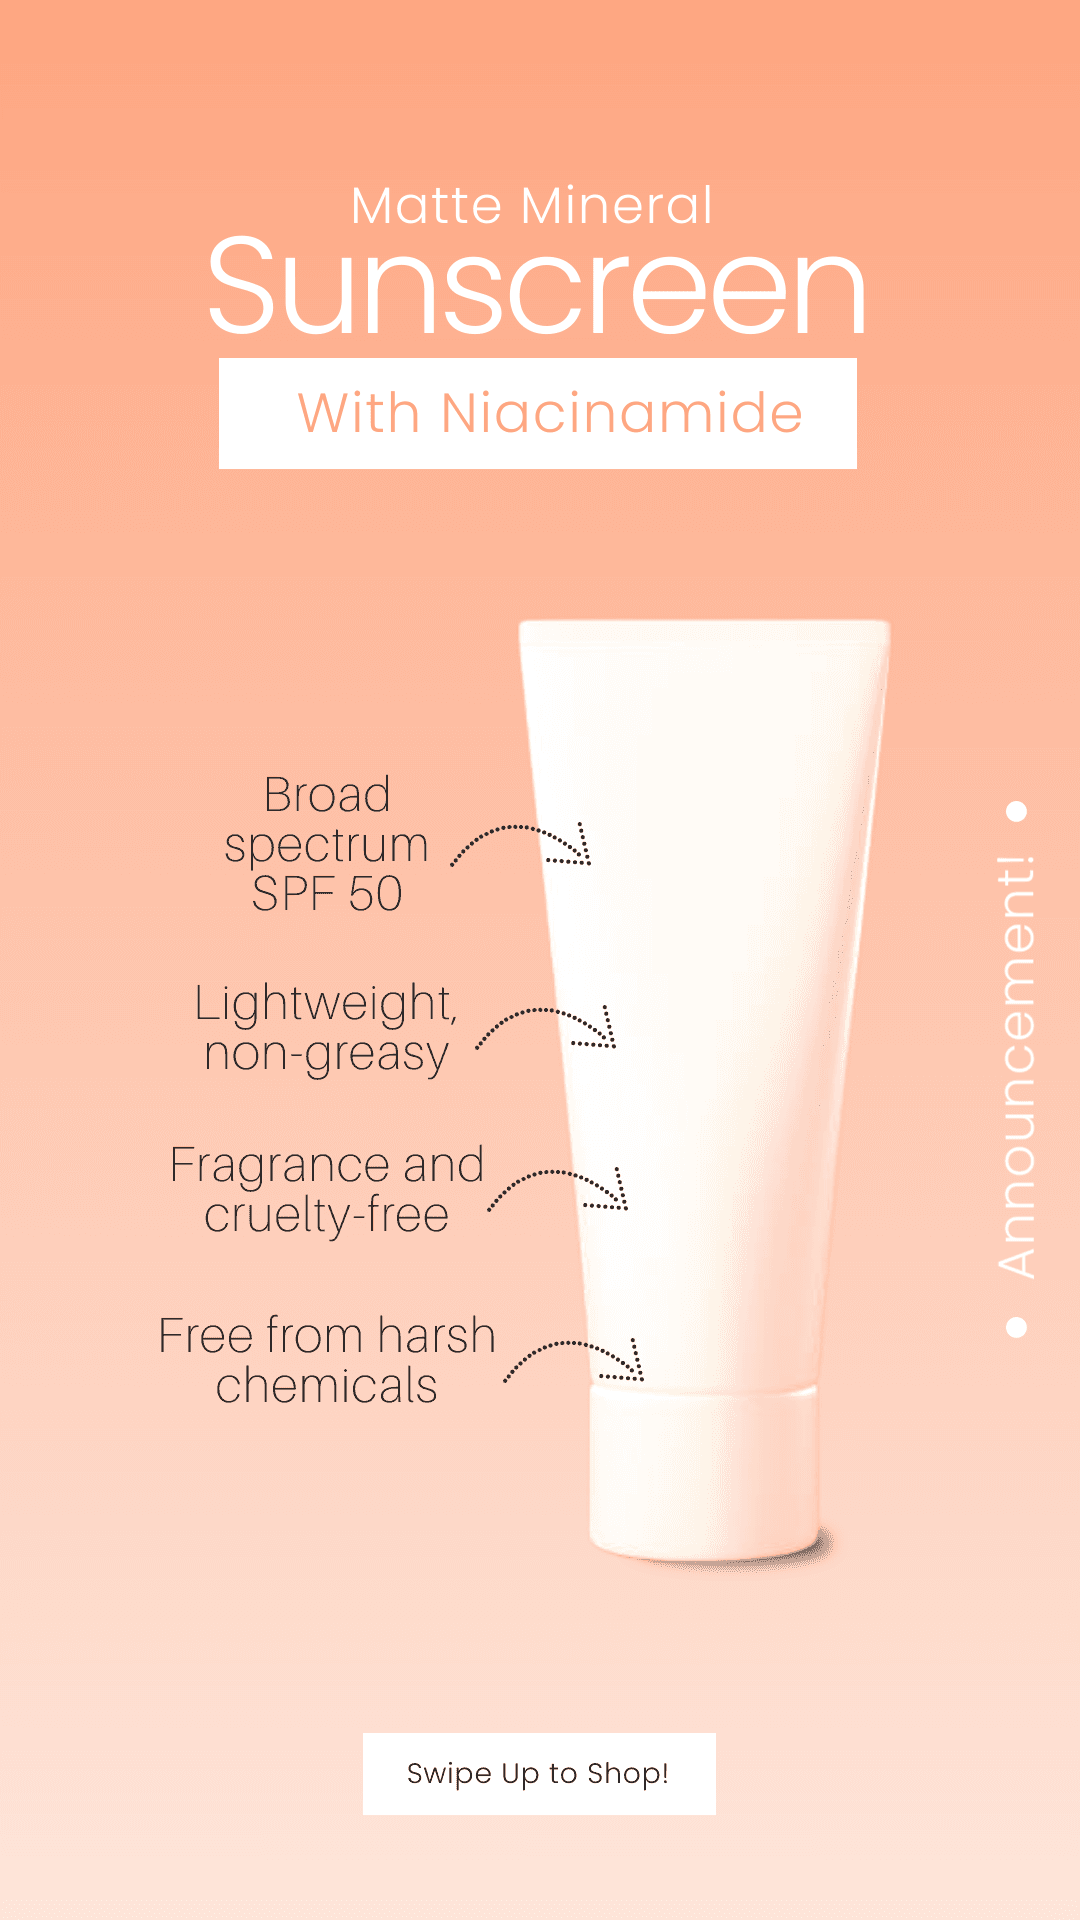 peach-sunscreen-product-announcement-instagram-story-template-thumbnail-img